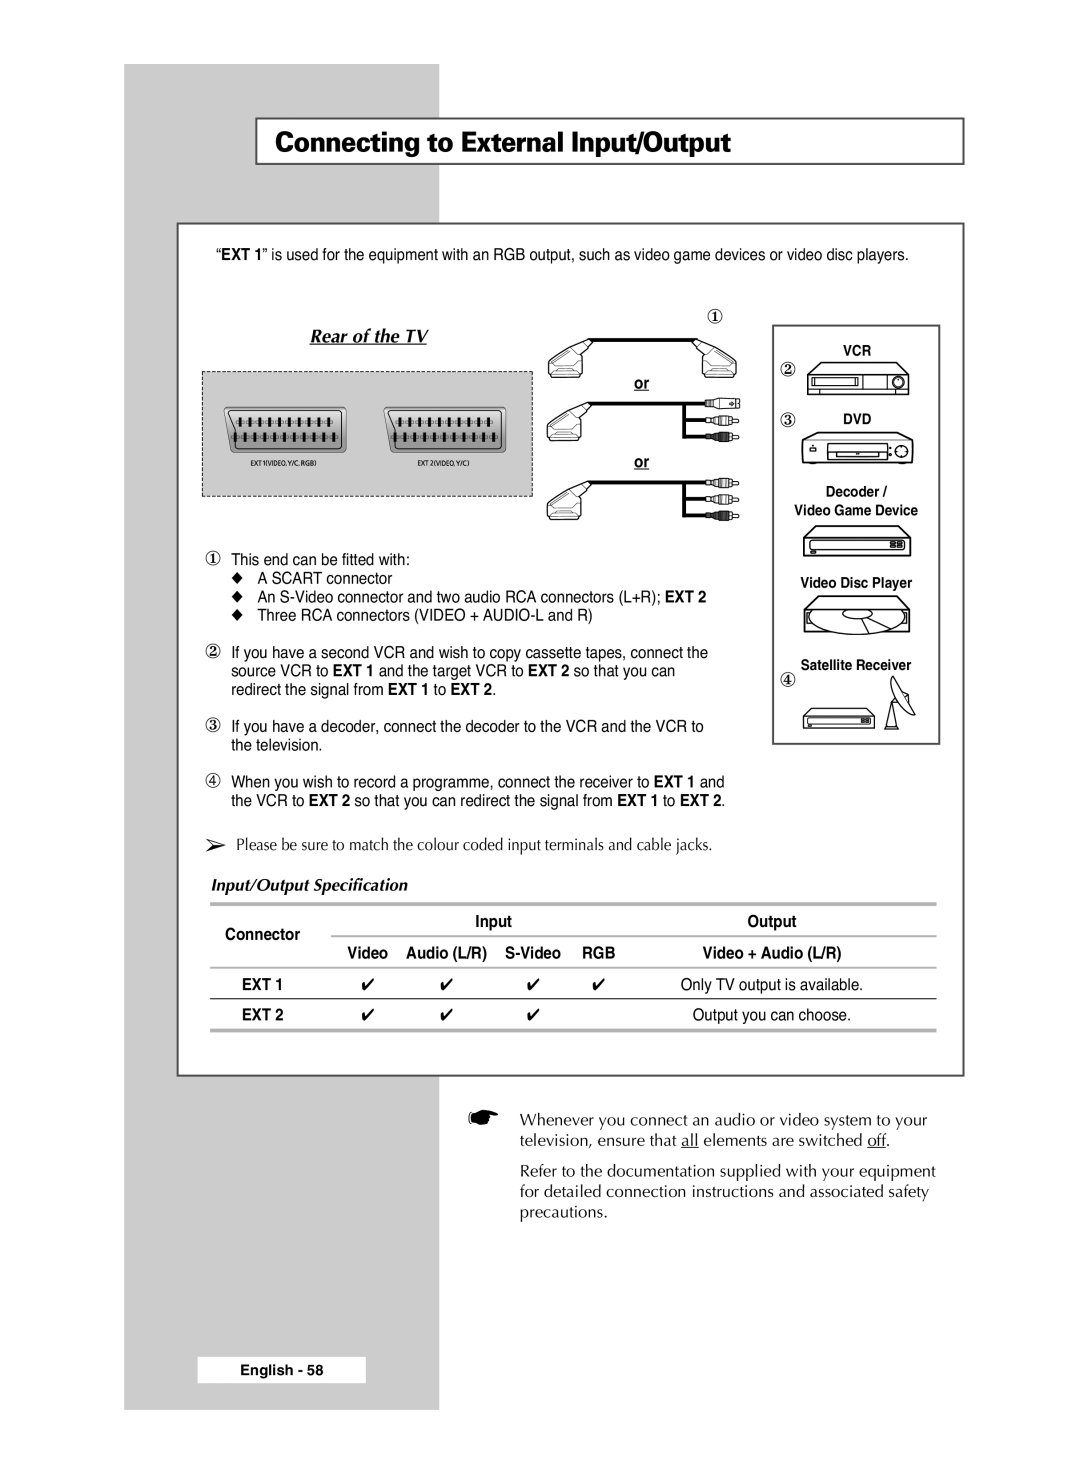 Samsung PS-42S5S manual Connecting to External Input/Output, Rear of the TV, Input/Output Specification 